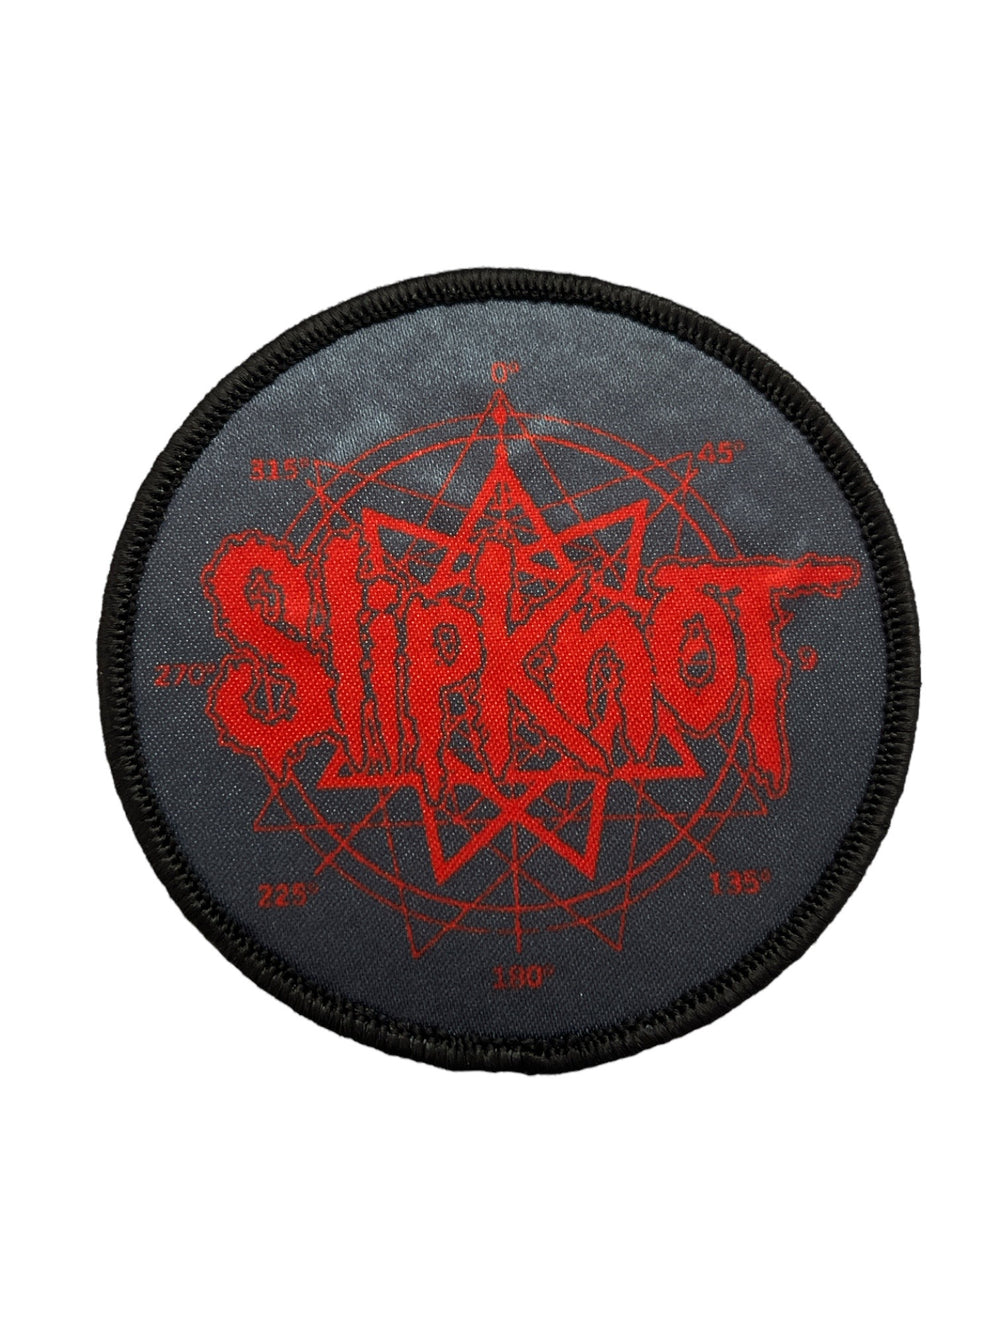 Slipknot Logo & Nonagram Round Official Woven Patch Brand New